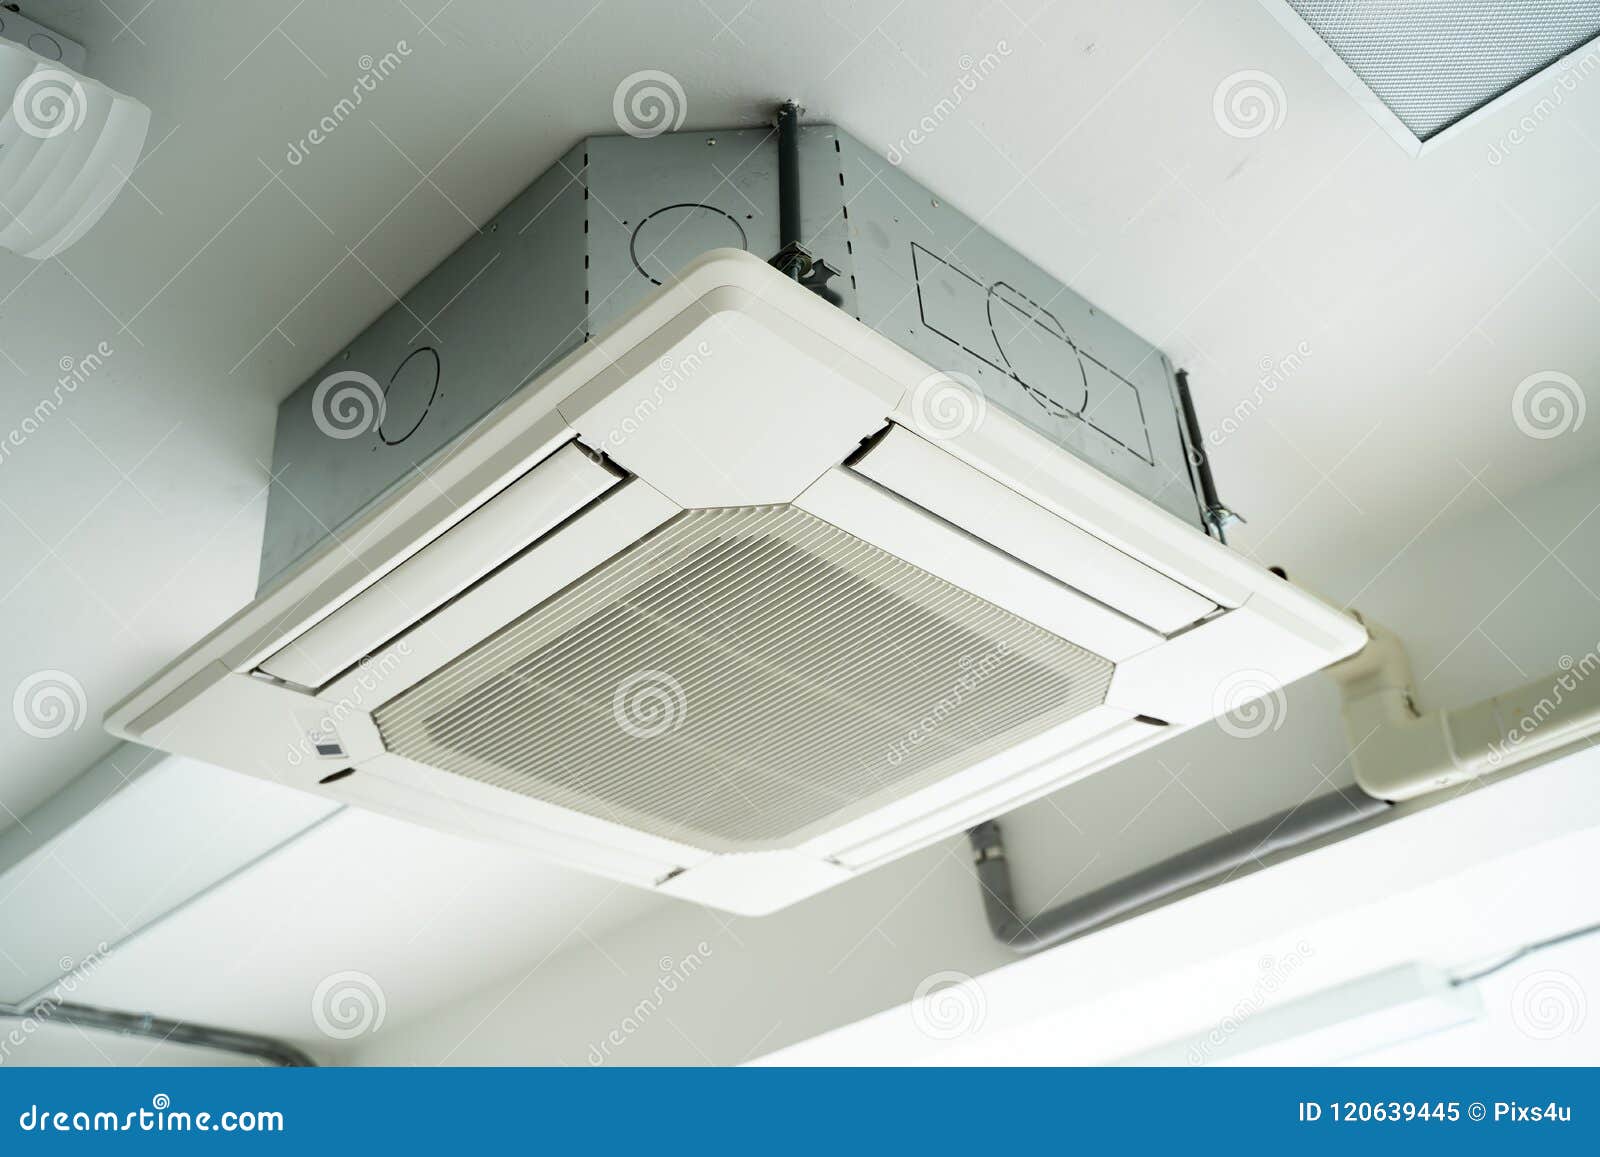 Air Condition Unit Hanging On The Ceiling Stock Image